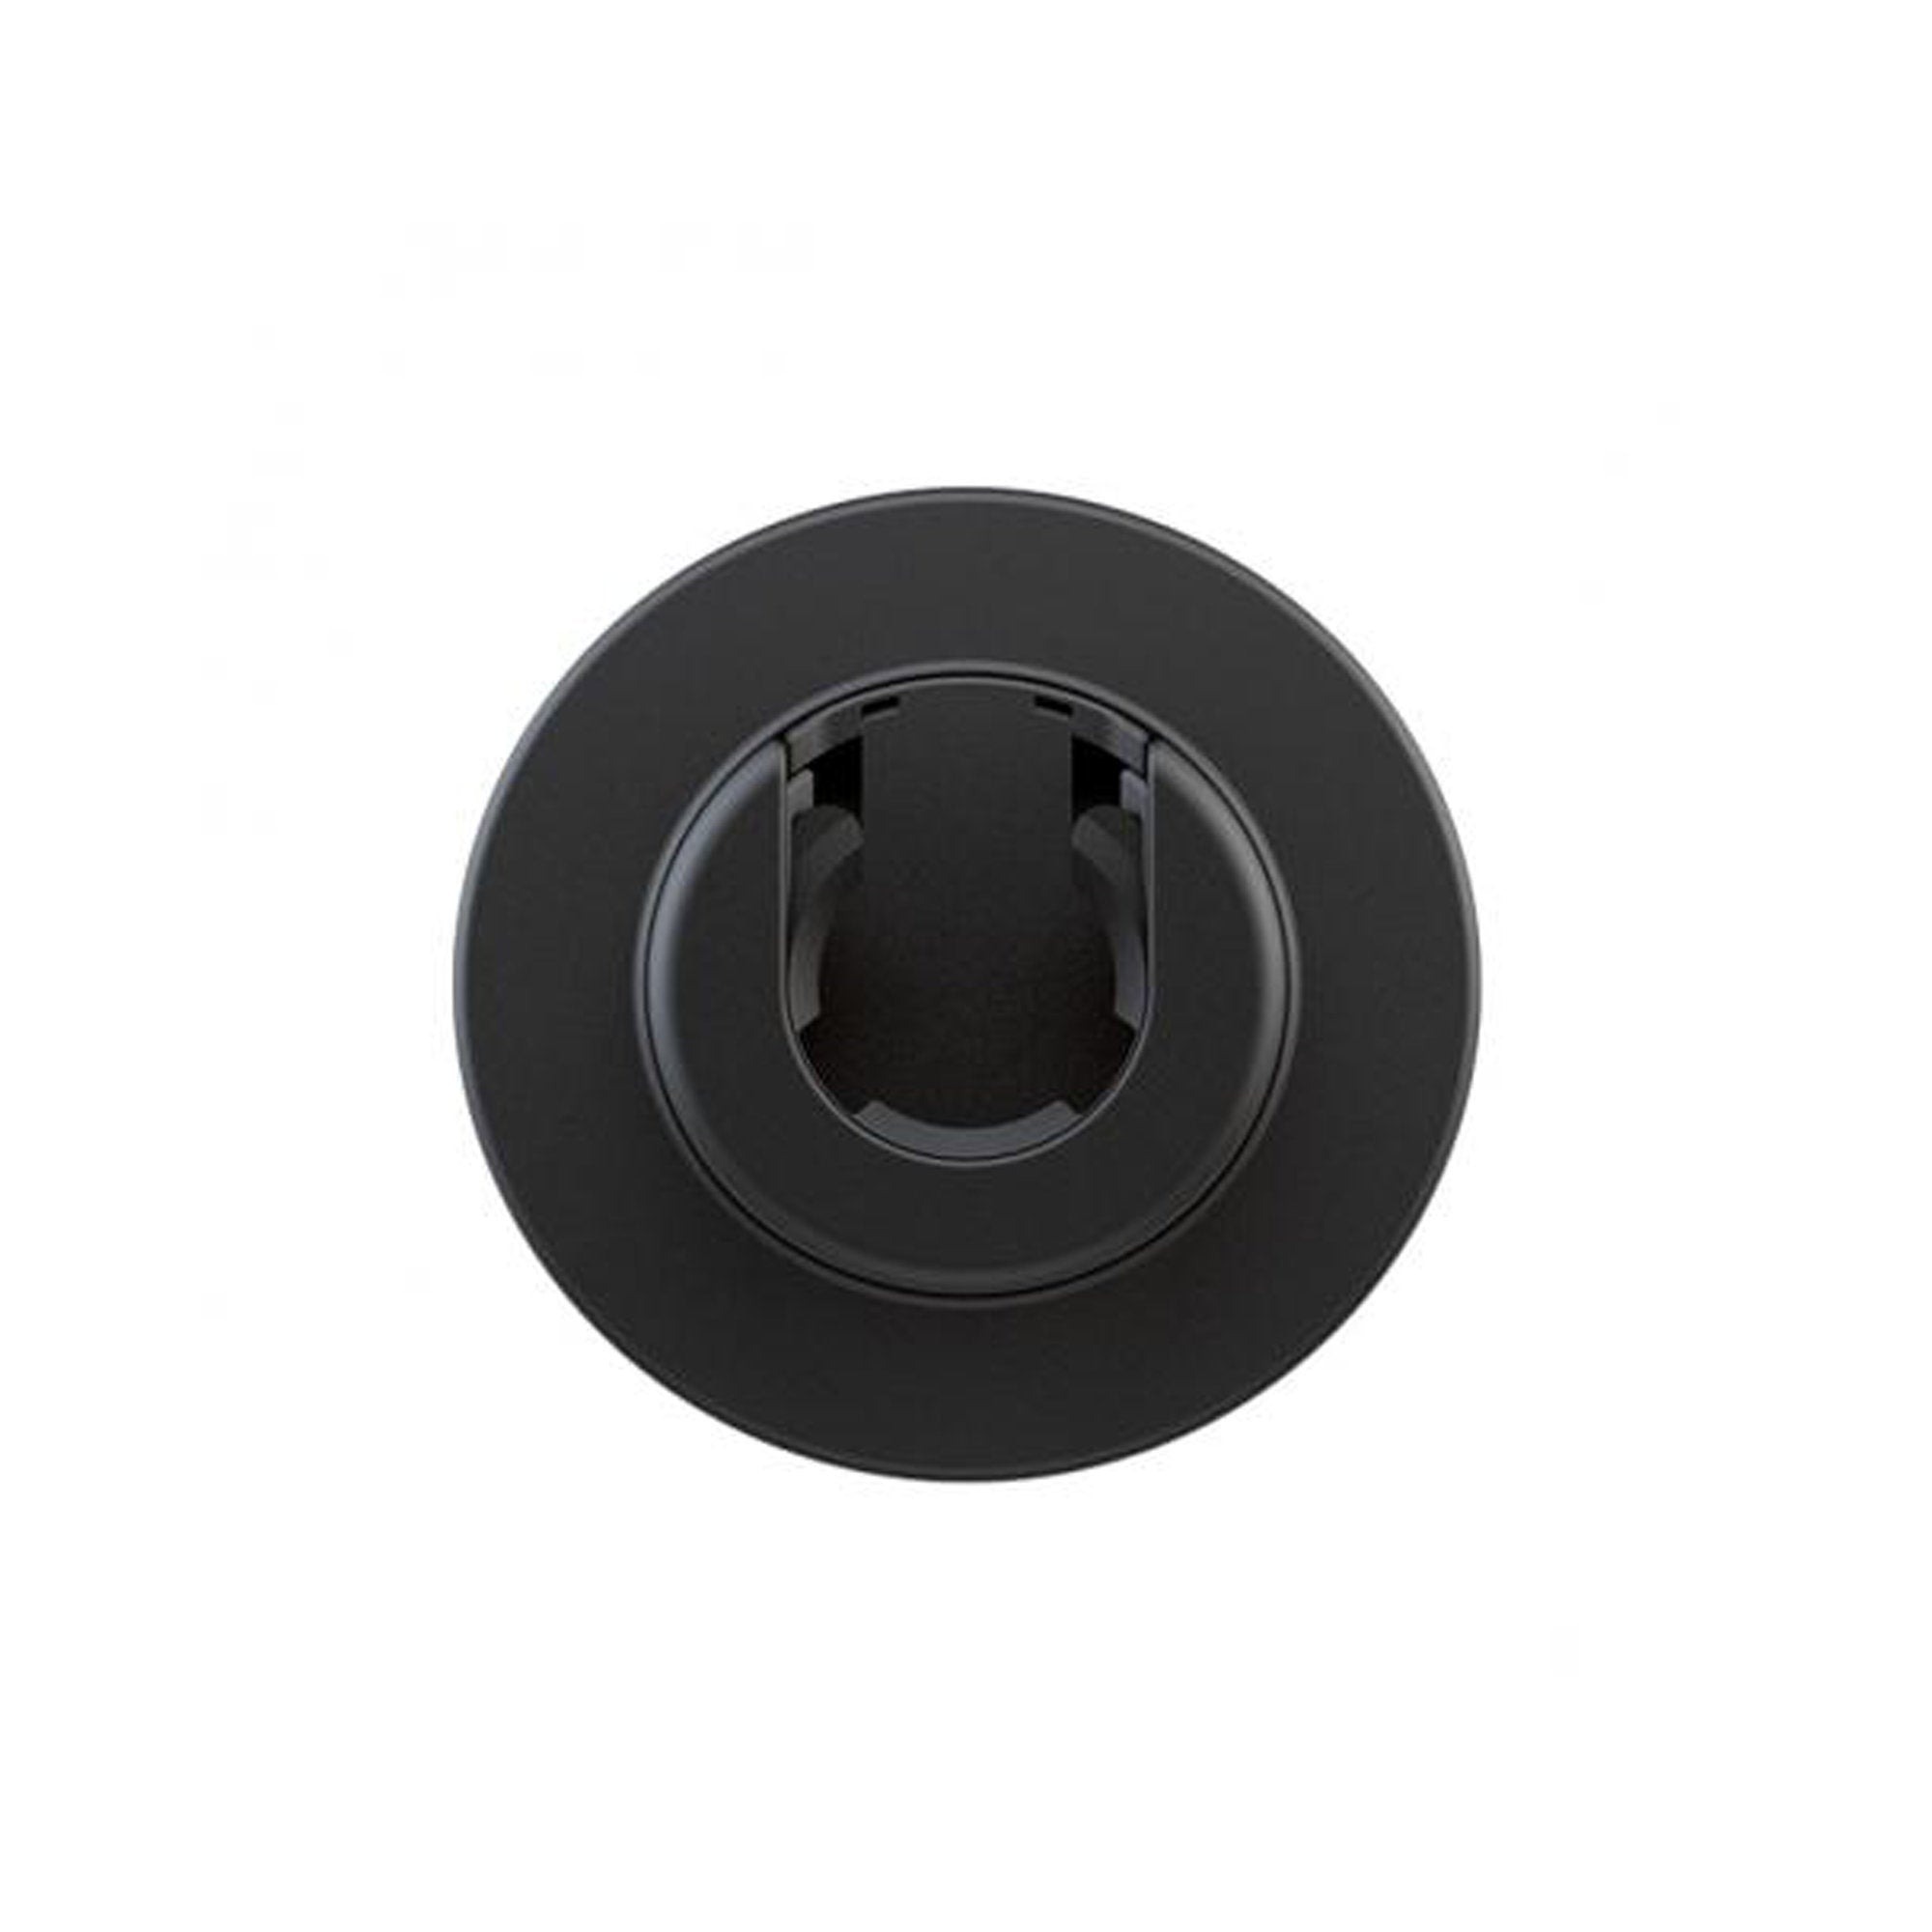 Fidlock V-buckle 25mm Black with Pull